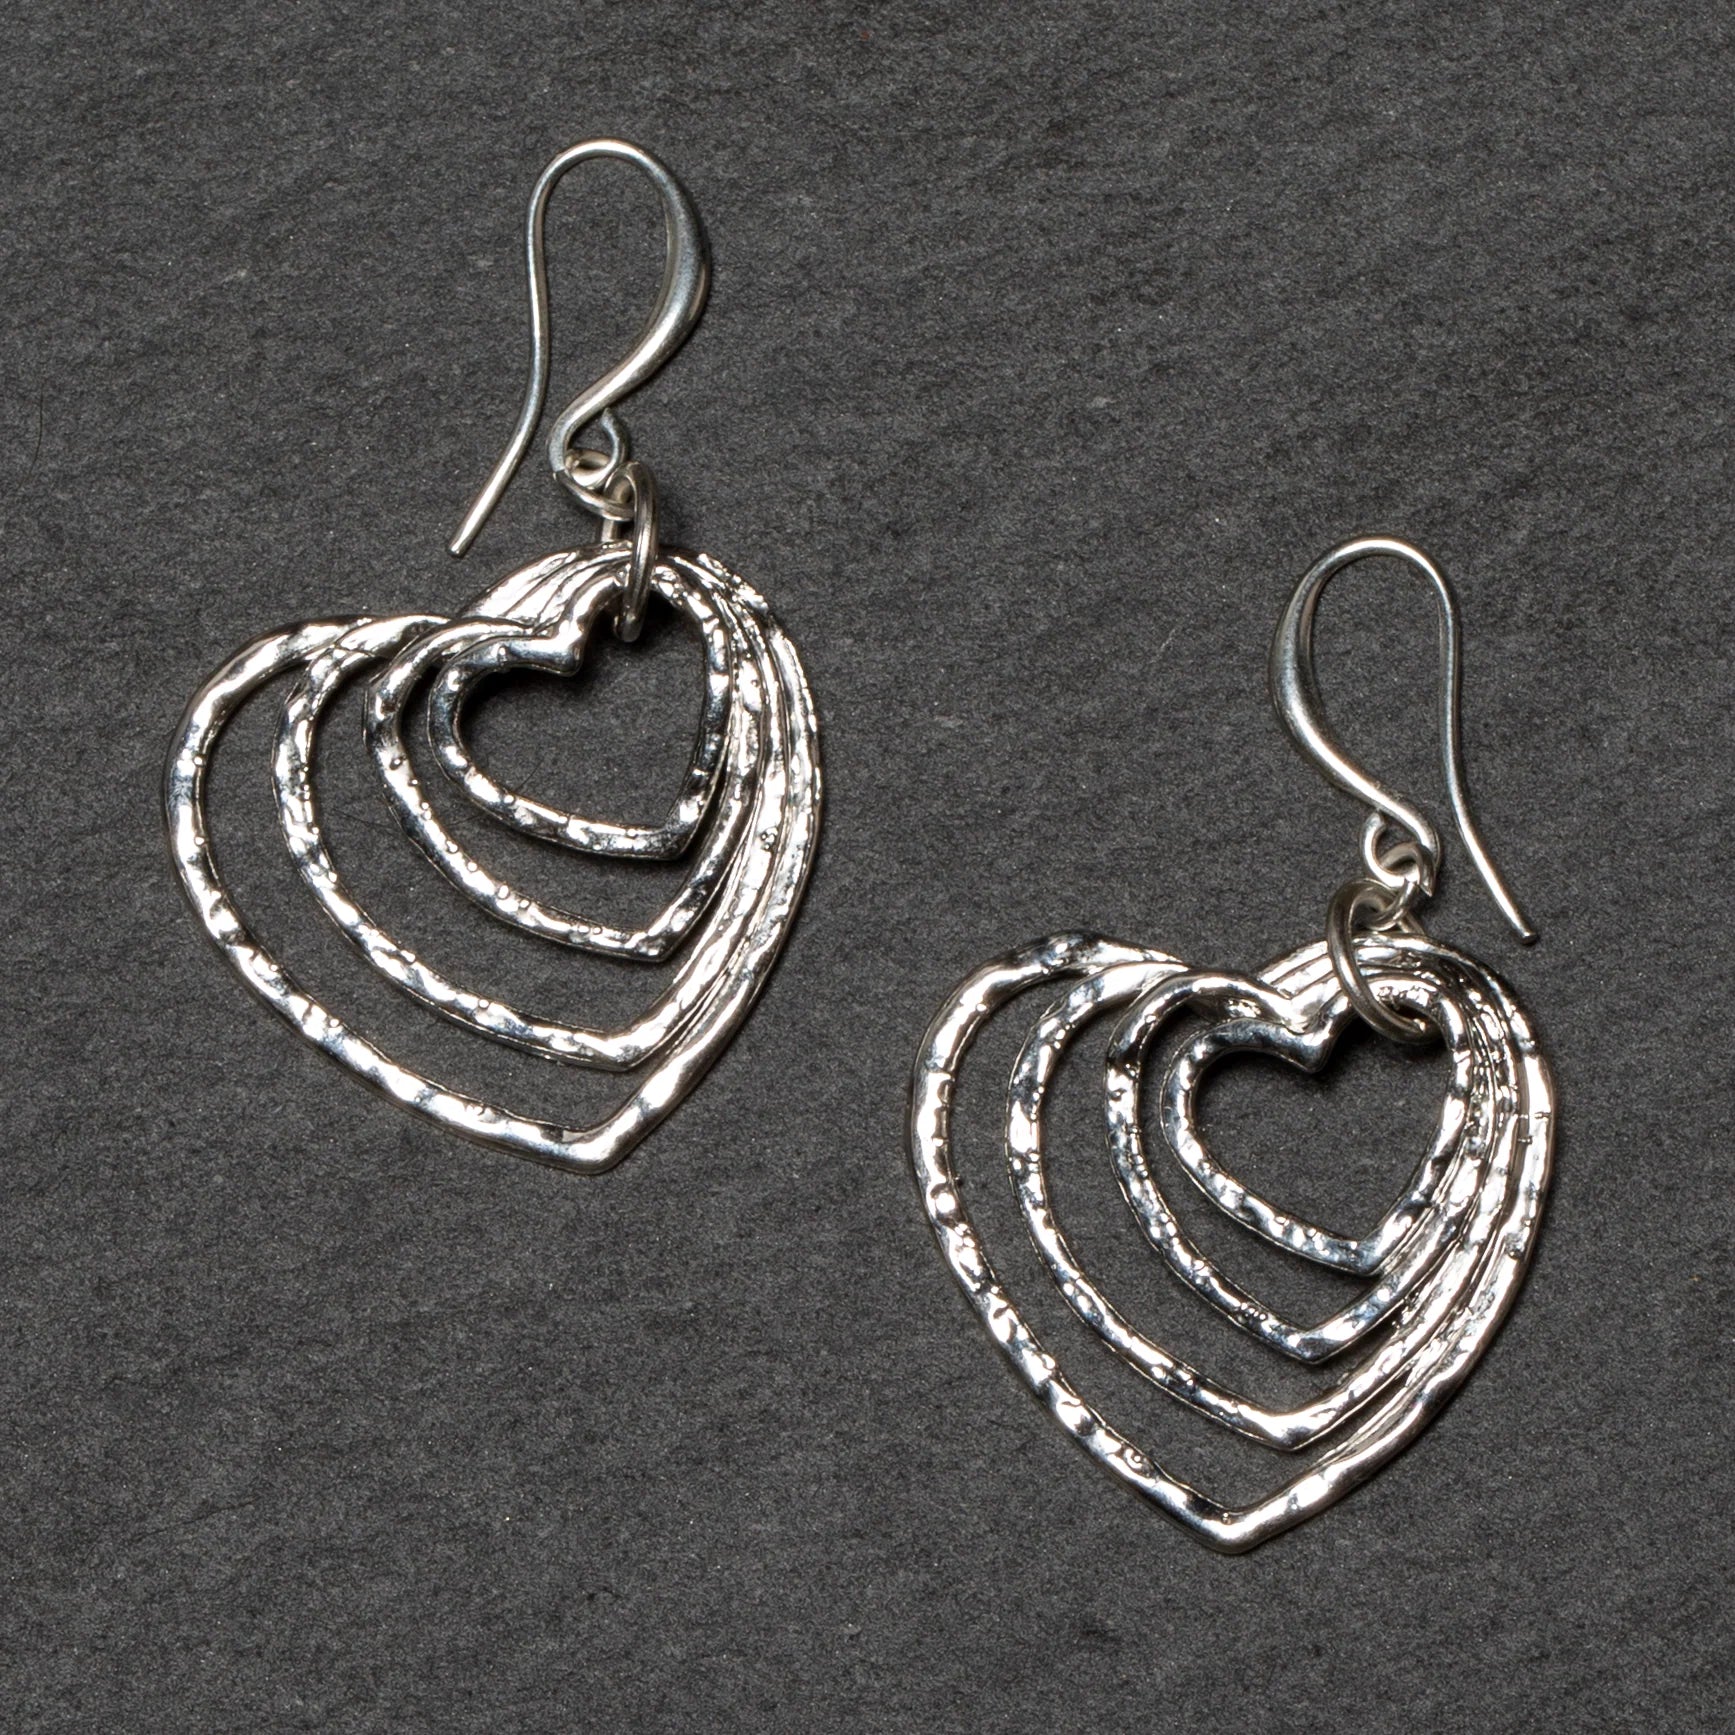 TEXTURED STACKED OPEN HEART SHAPED SILVER EARRINGS Earrings FashionWear Collection Silver 